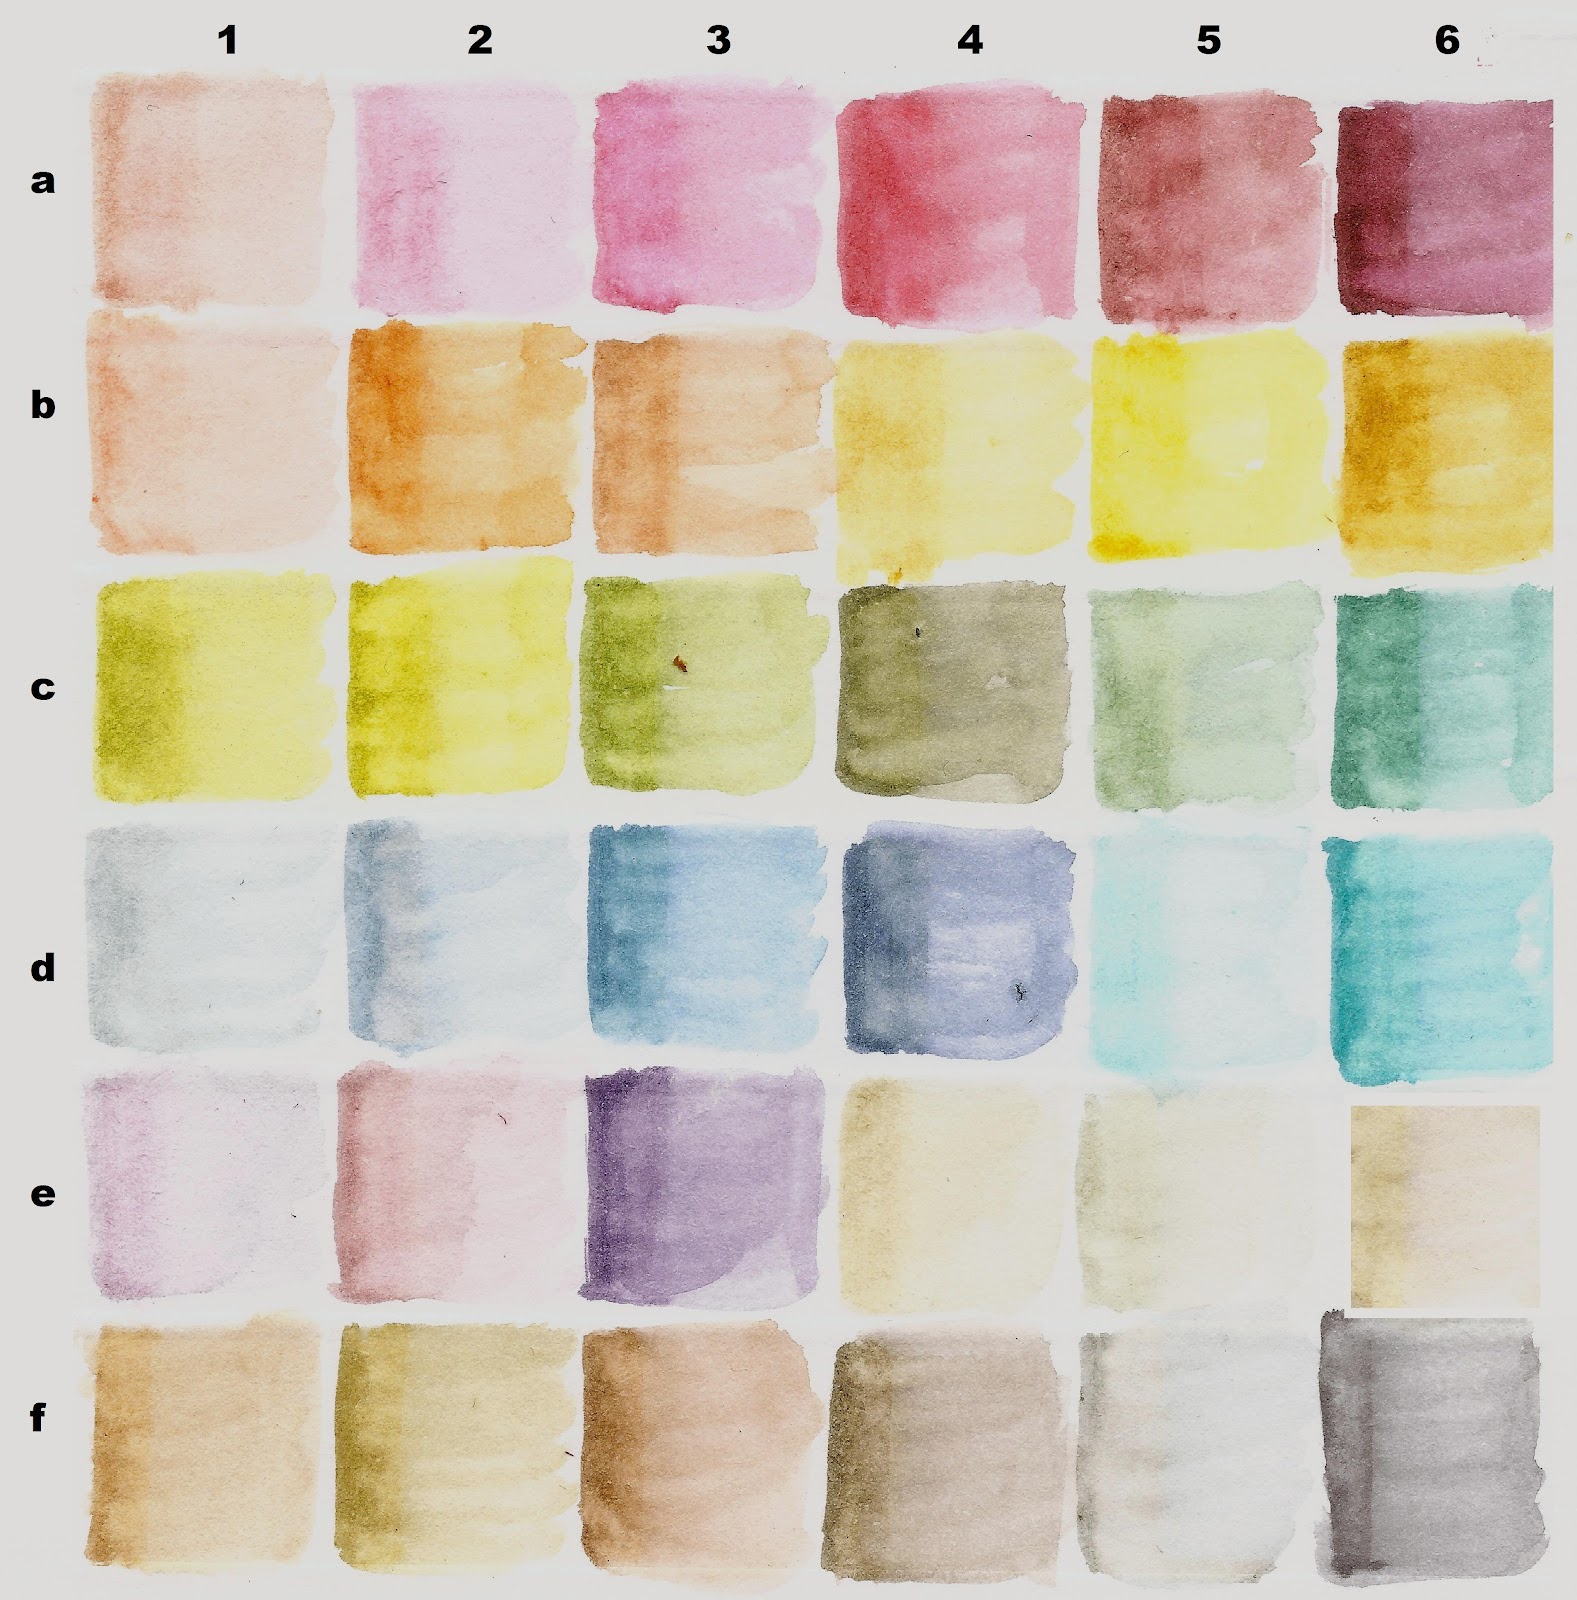 Tim Holtz Distress Stain Color Chart